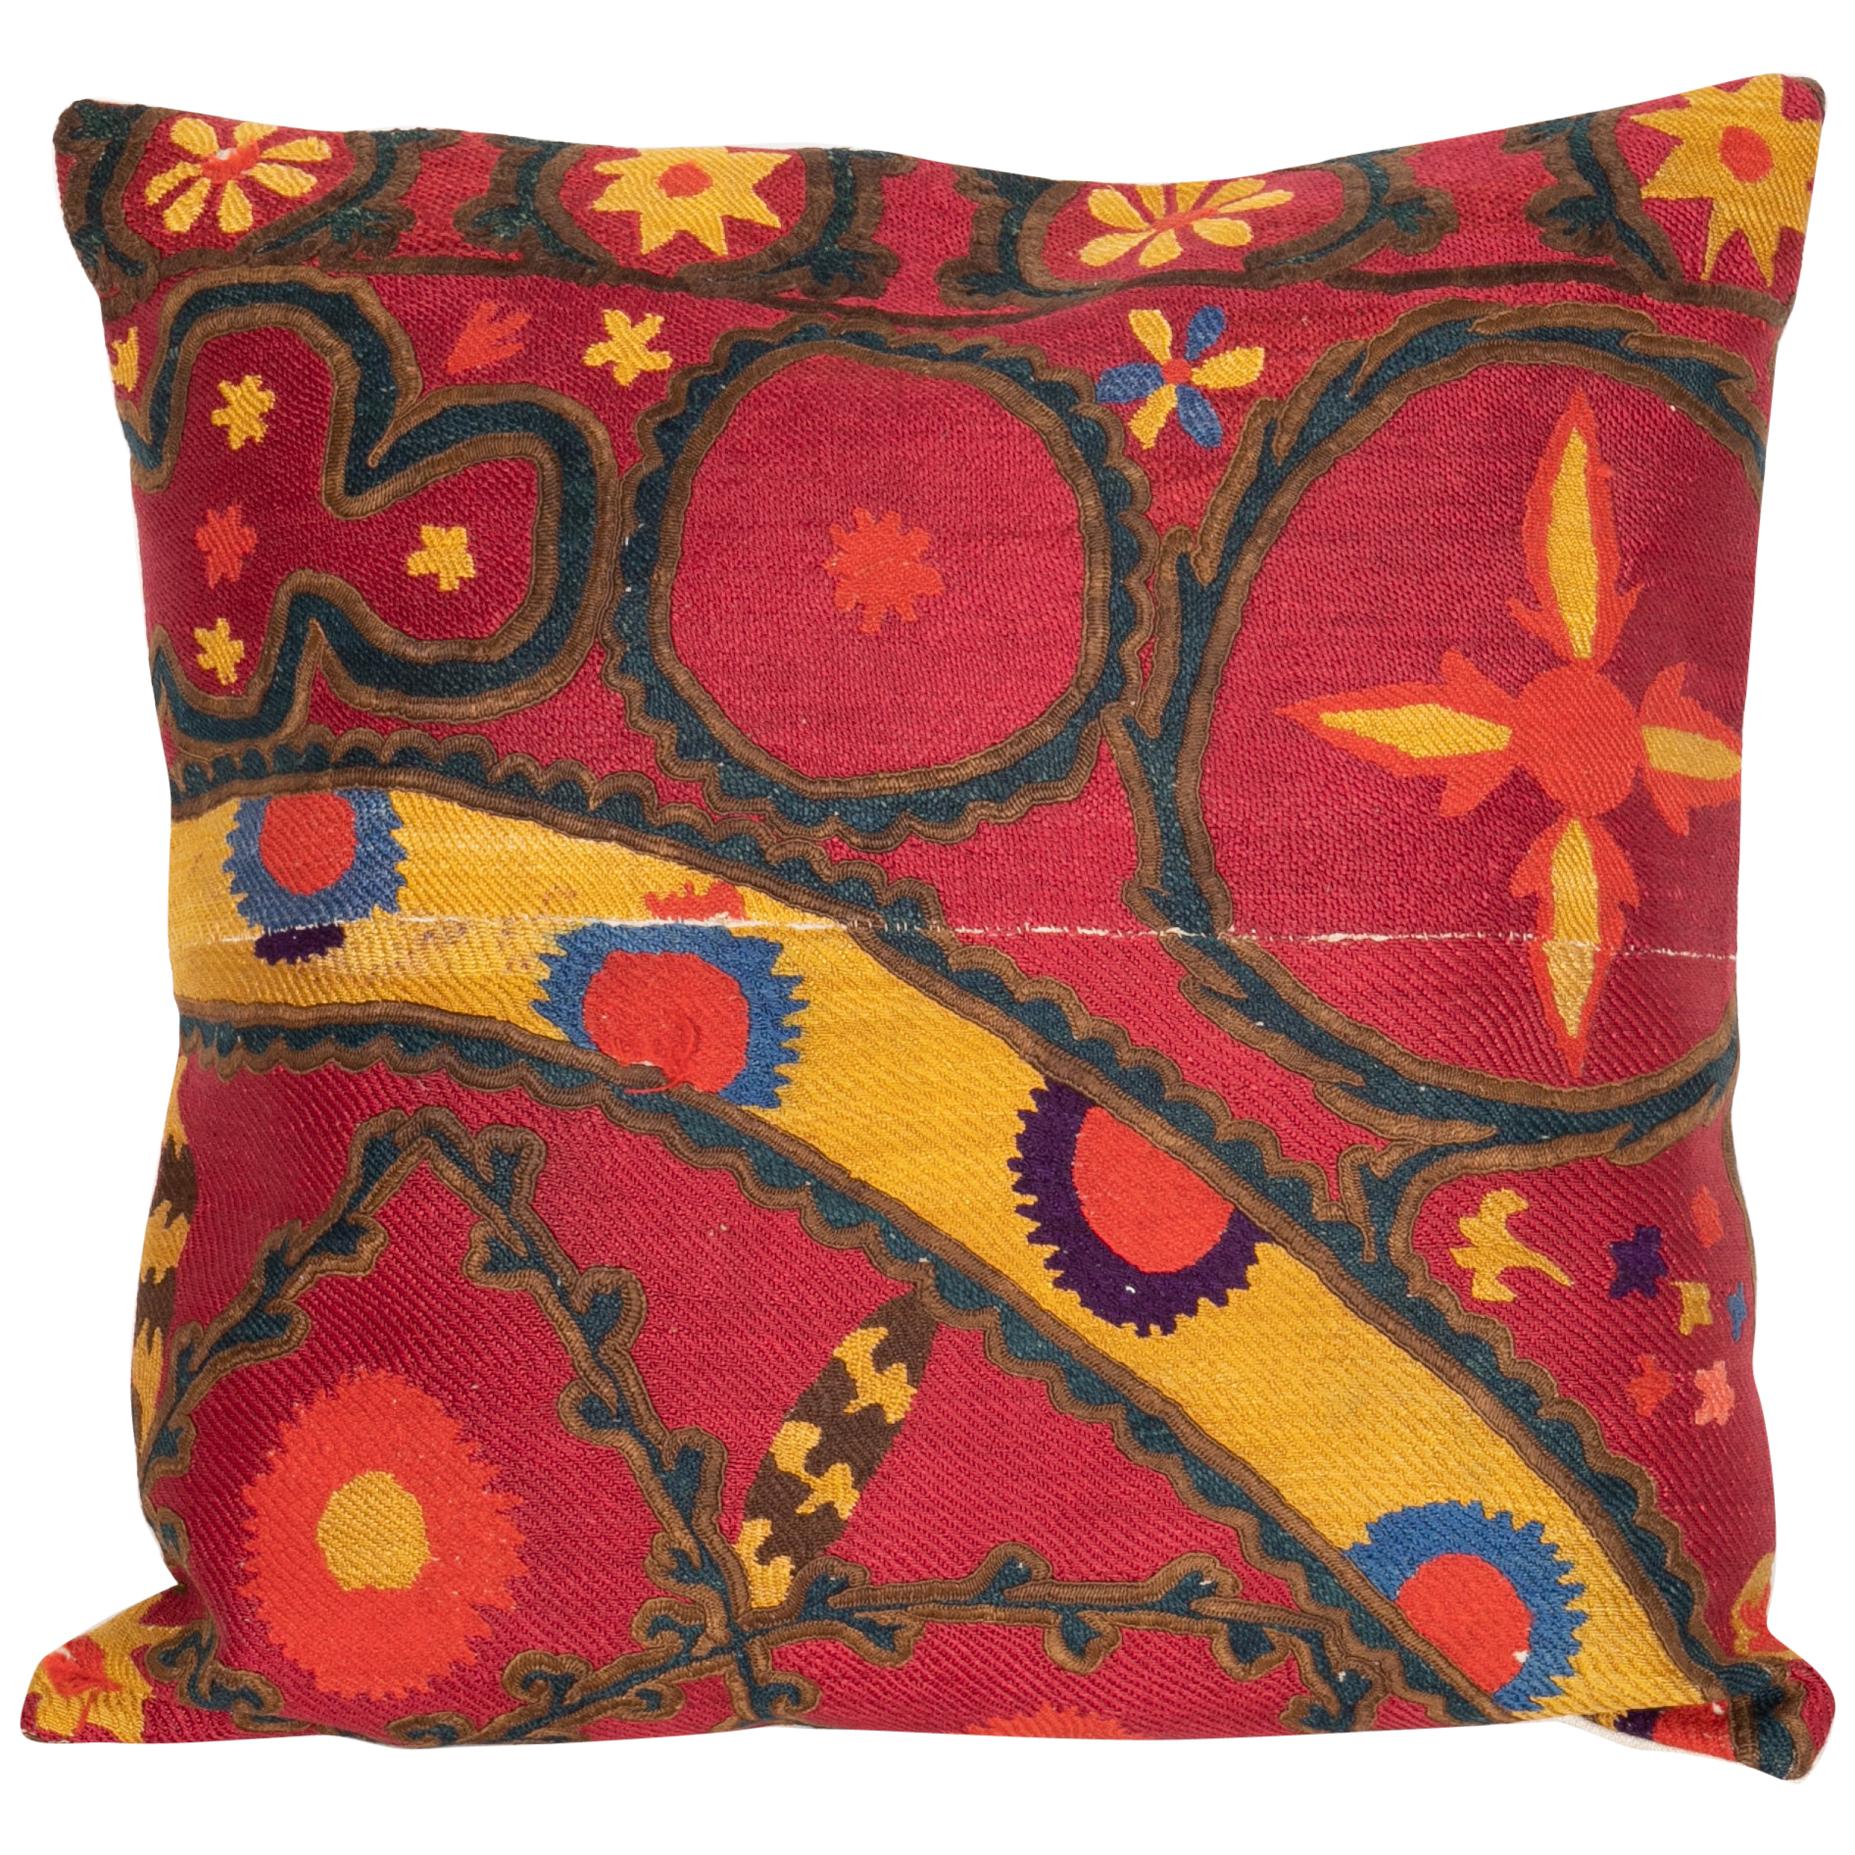 Antique Suzani Pillow Case Fashioned from a Late 19th Century Pishkent Suzani For Sale